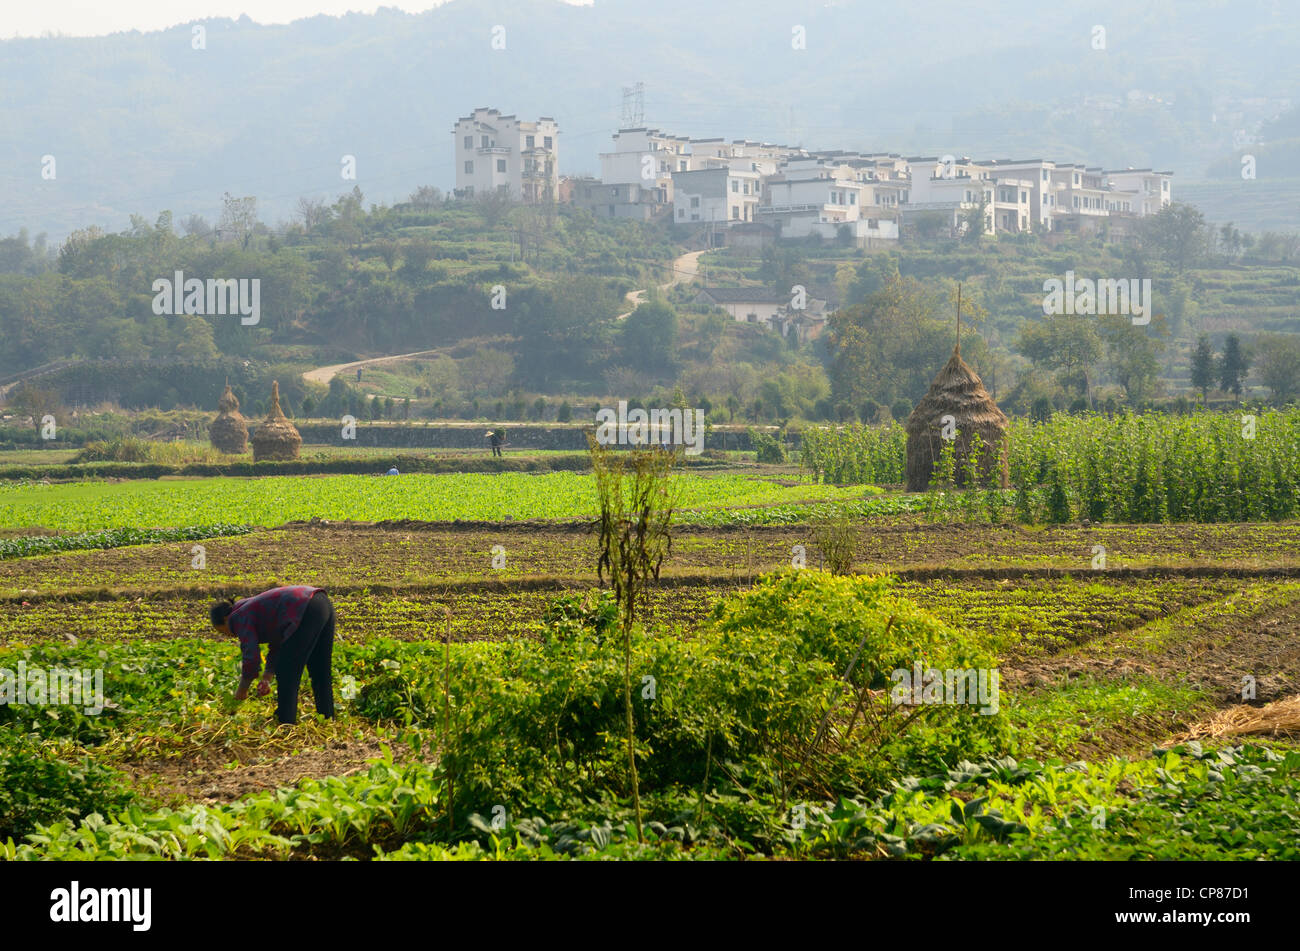 Woman working in farm fields on rich valley farmland at Yanggancun hilltop village Huangshan Peoples Republic of China Stock Photo